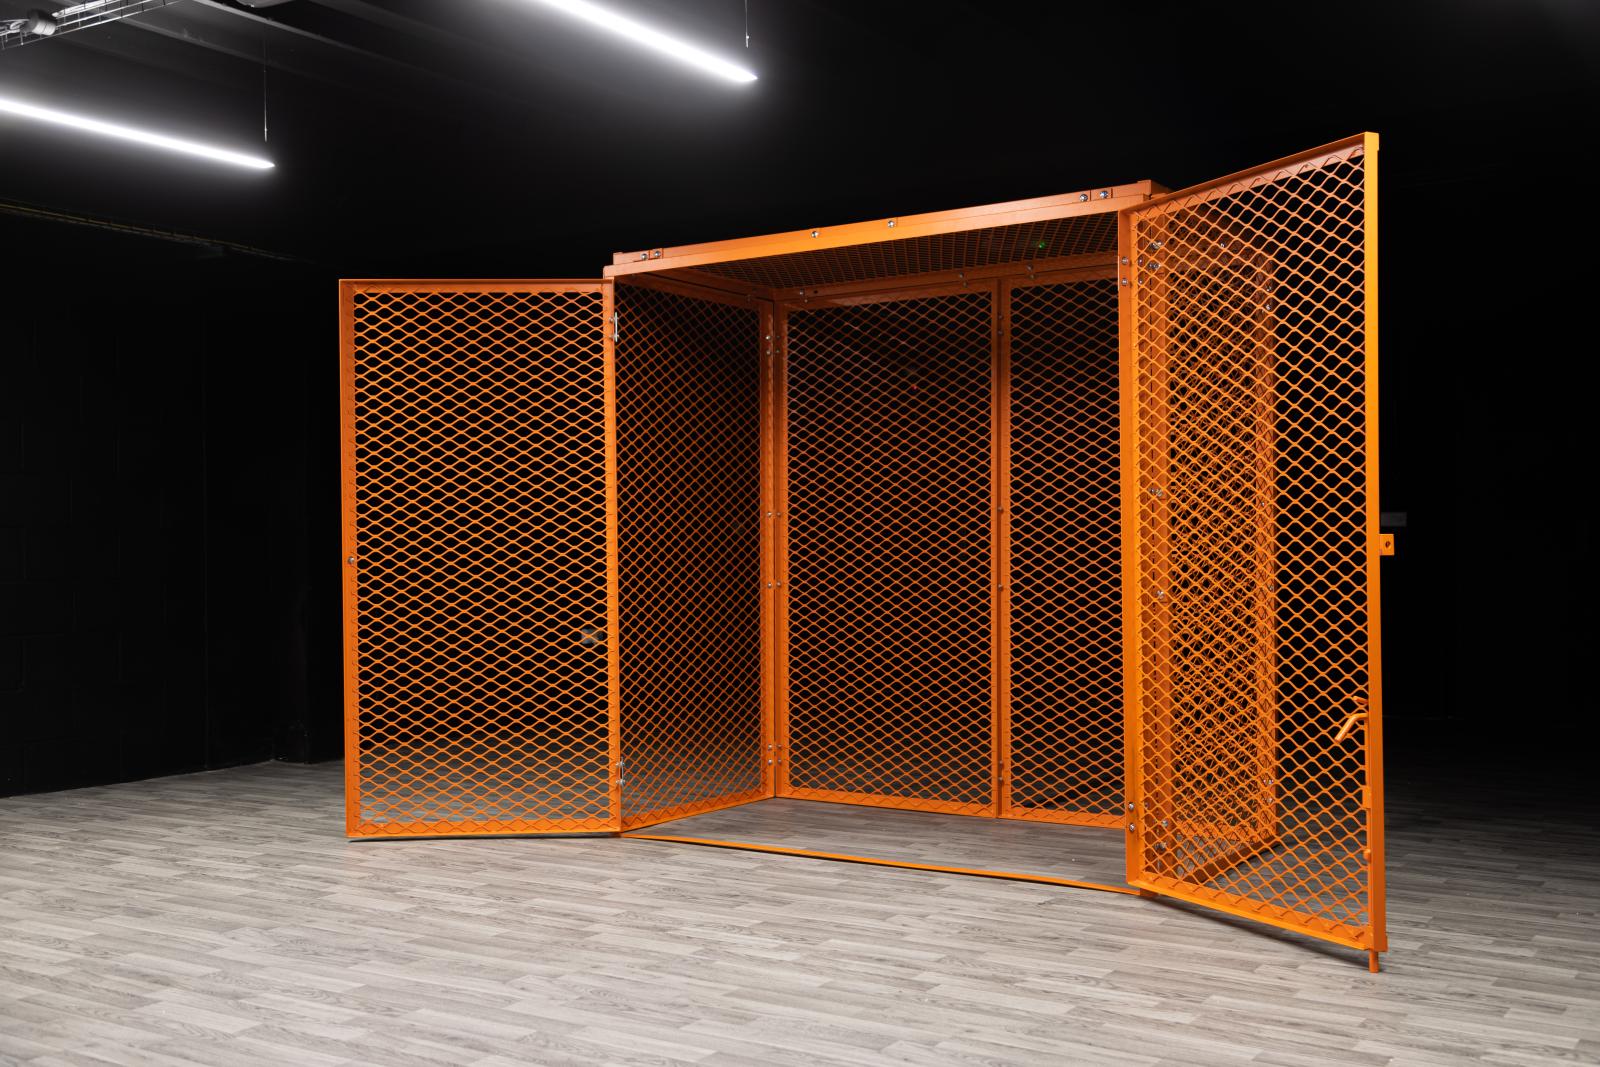 Metal security cages – what are the options?